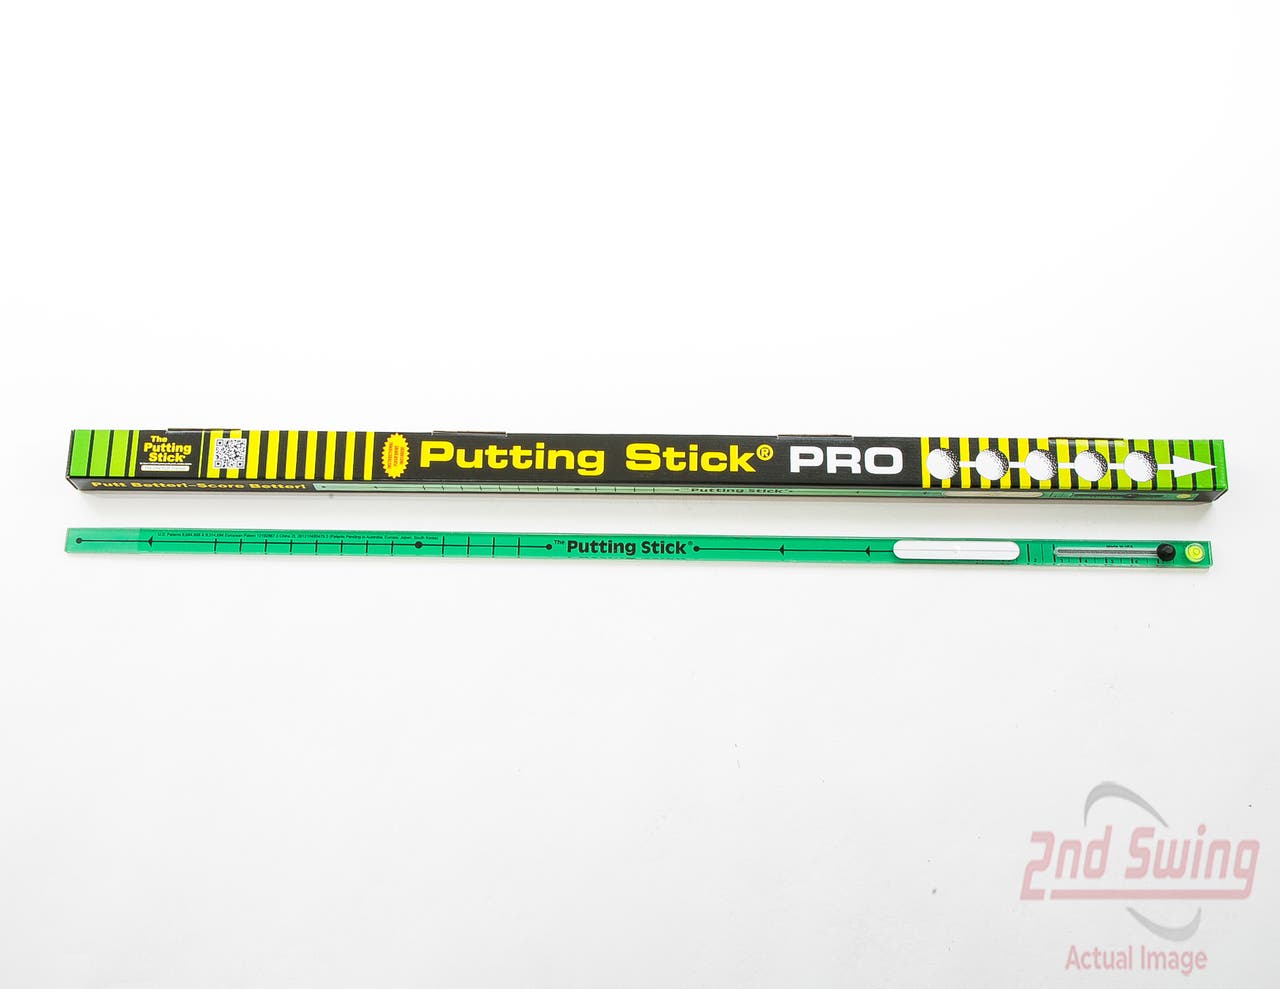 The Putting Stick Pro Putting Trainer Accessories